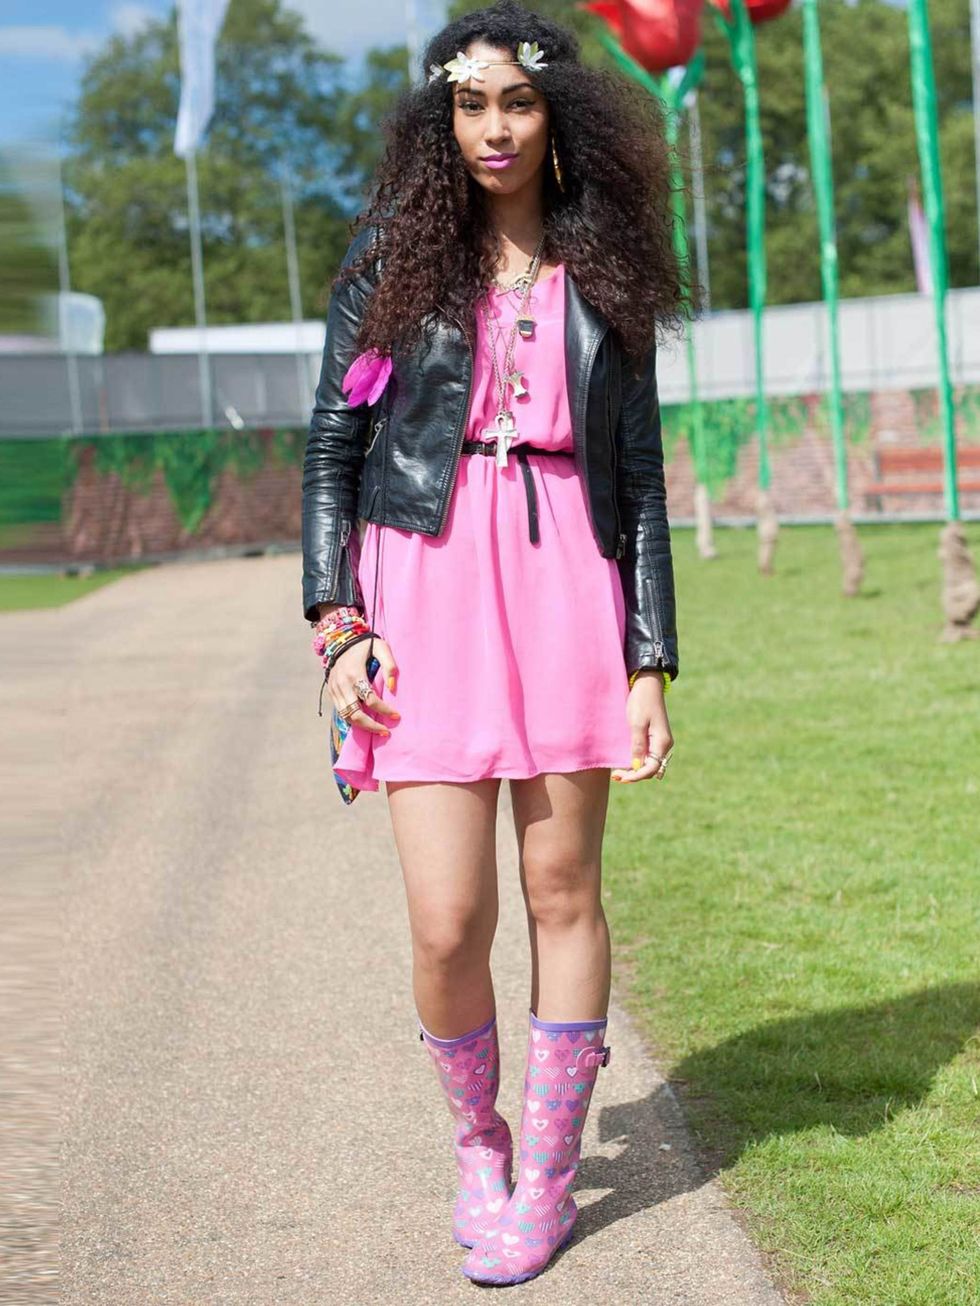 <p>Cheyenne Davide, MTV Presenter. Topshop jacket, H&amp;M dress, Shoe Zoo boots, bag from Jamaica, jewellery from eBay, River Island flowers.</p>